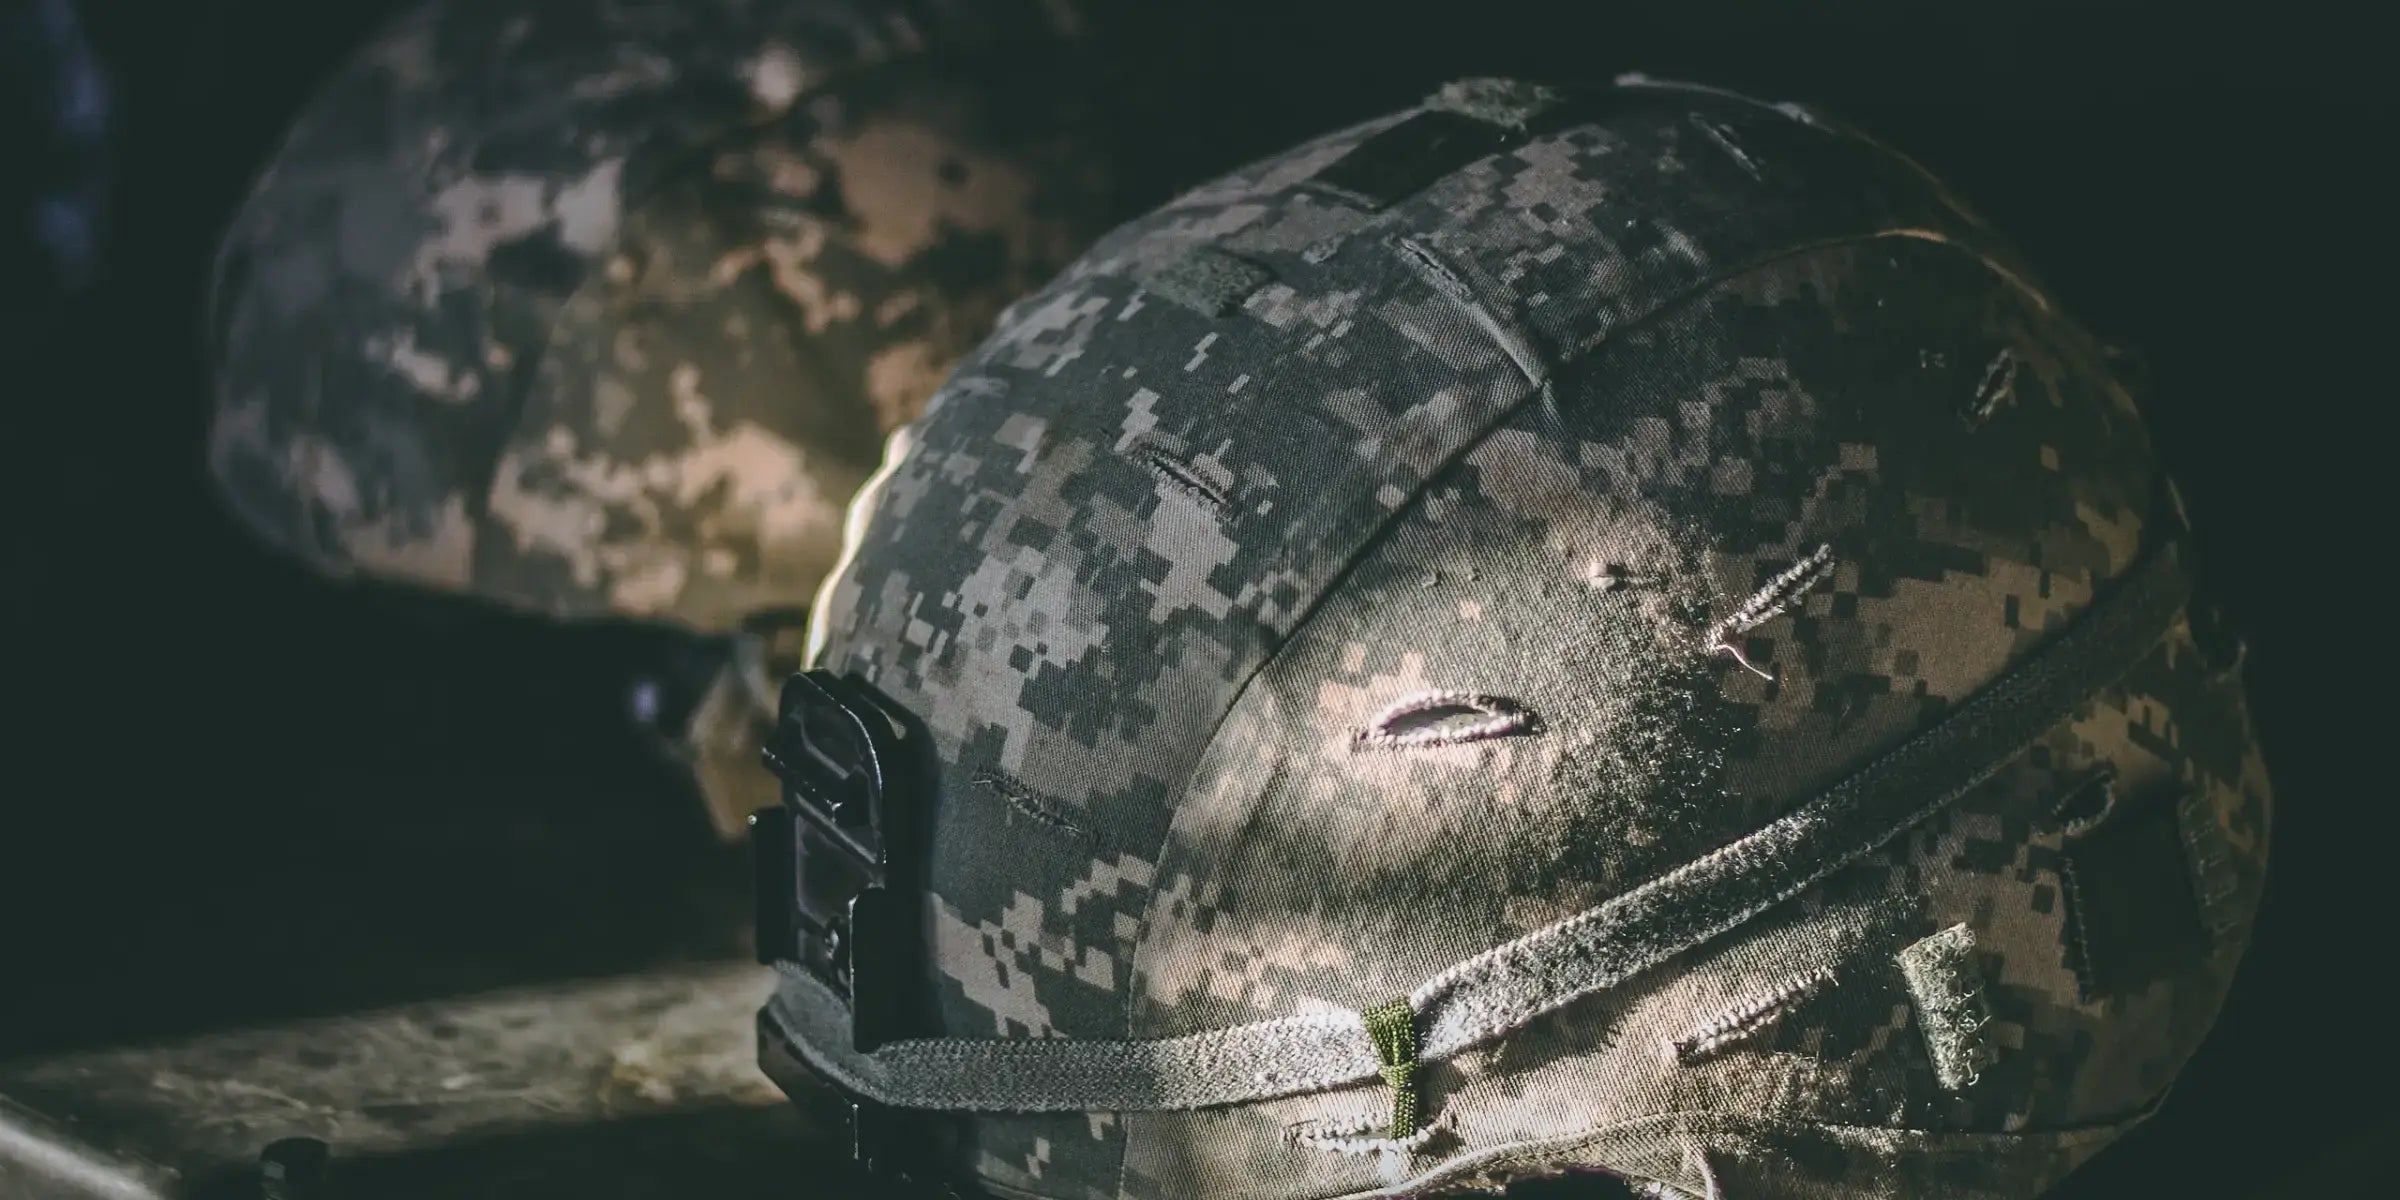 Image of Two Army, Navy, Military Helmets Showing CURVDs Support of the Military